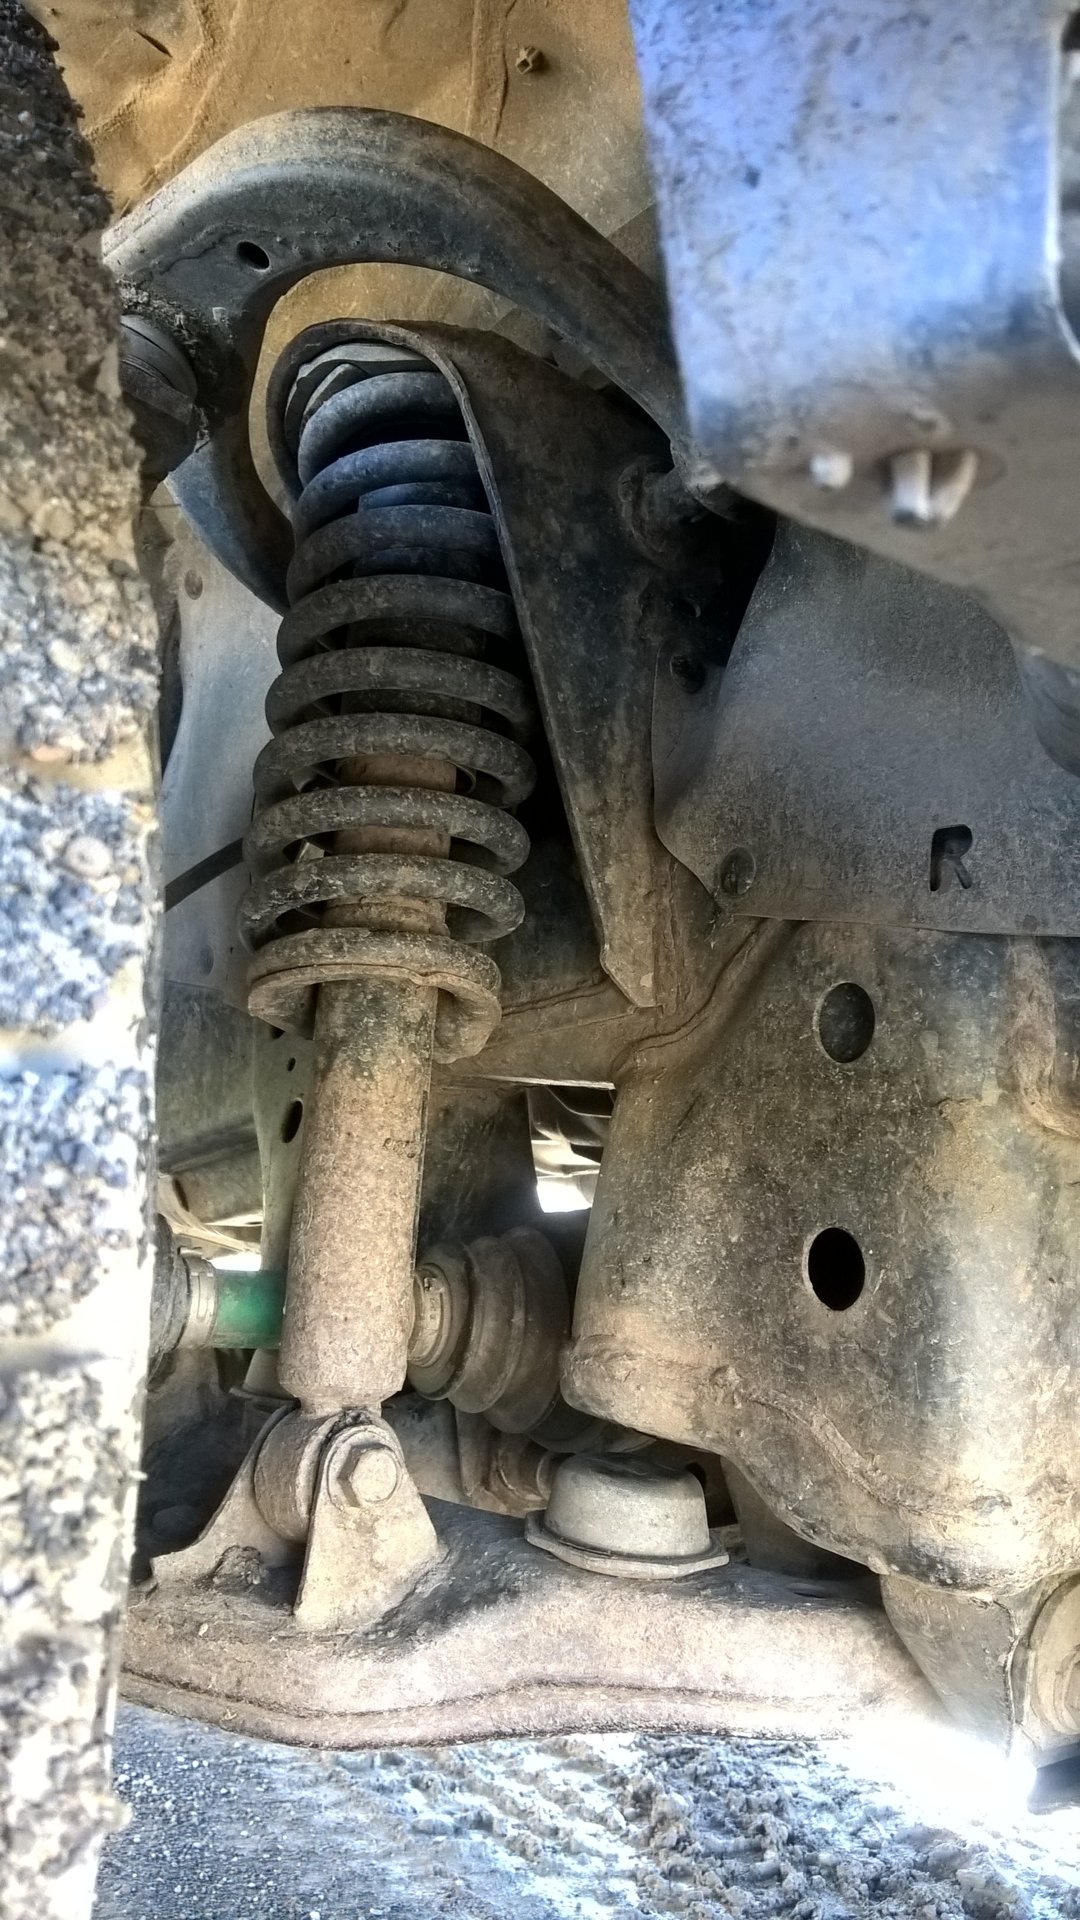 Collapsed suspension. What to replace with? | IH8MUD Forum